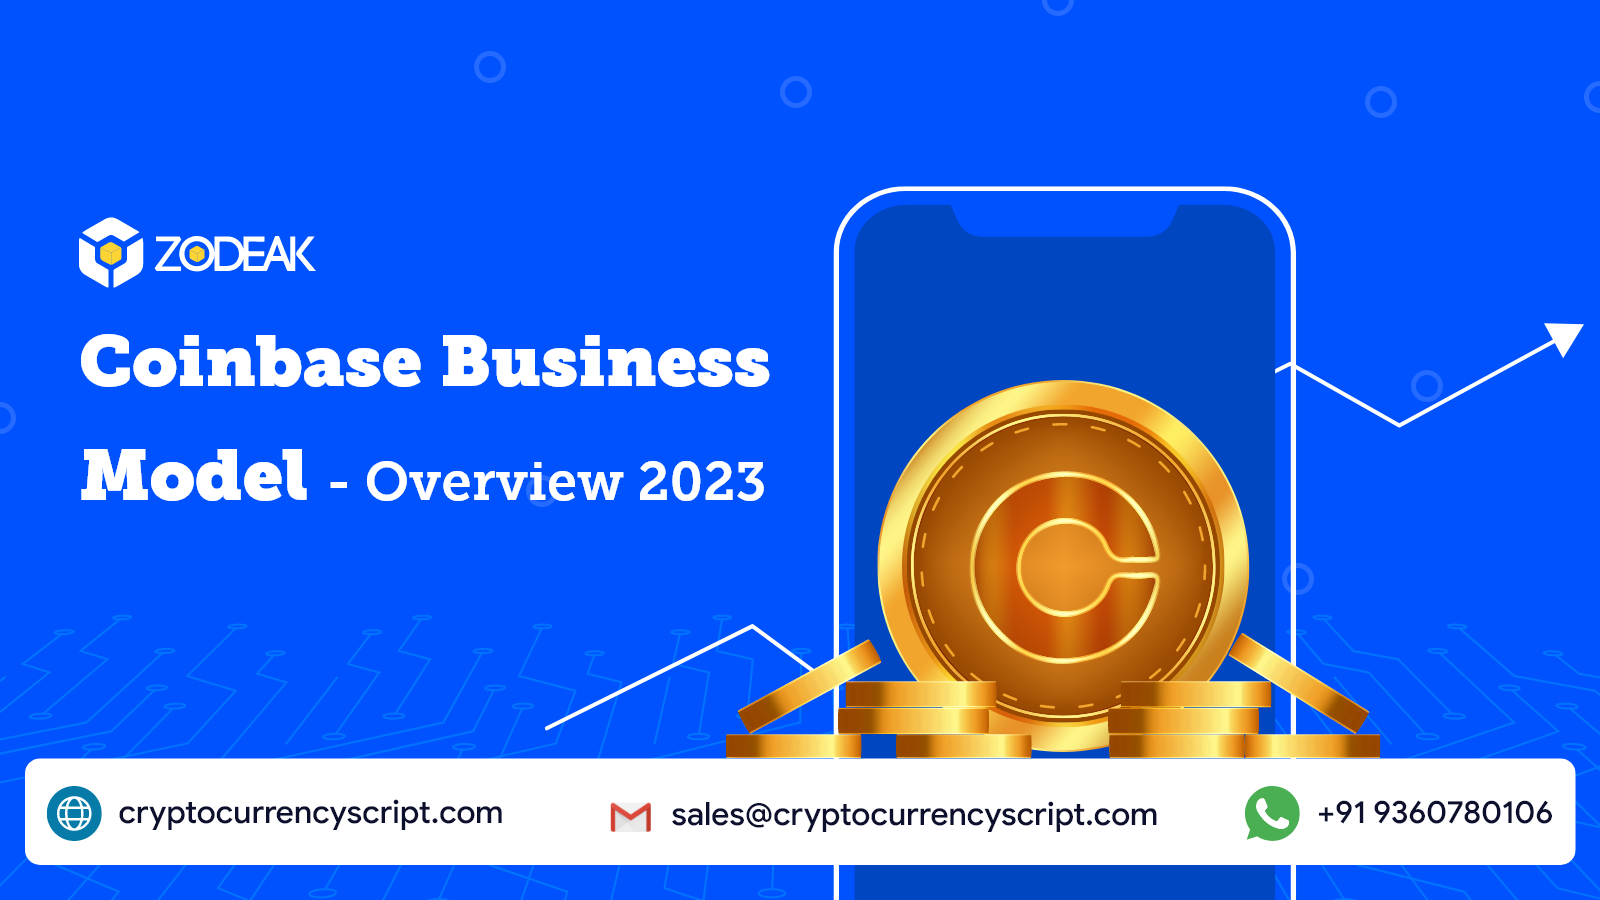 Coinbase Business Model - Overview 2023